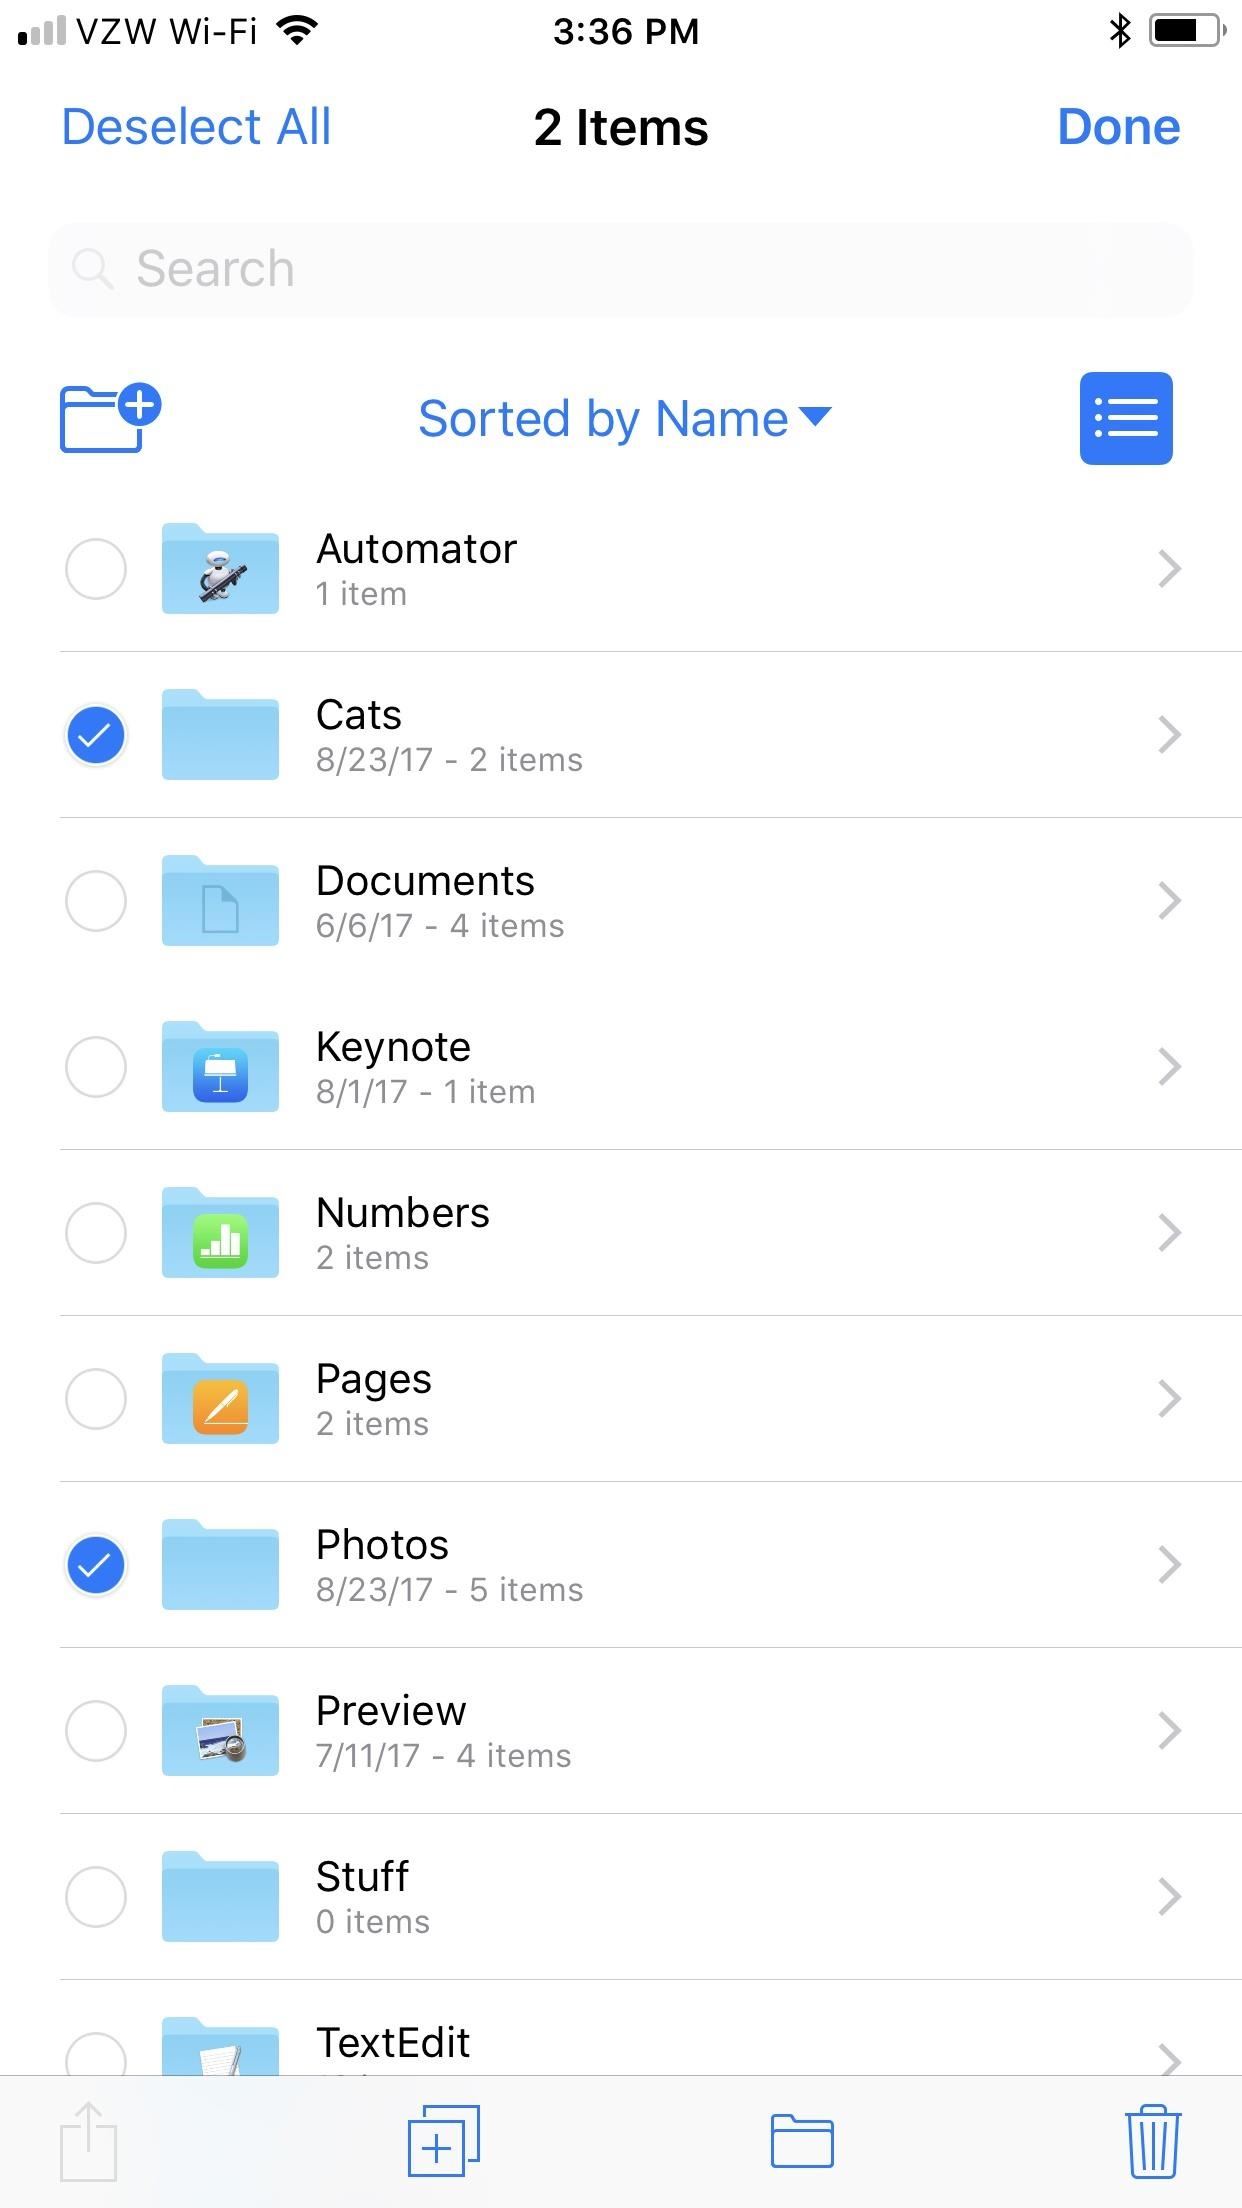 How to Use the File Manager on Your iPhone